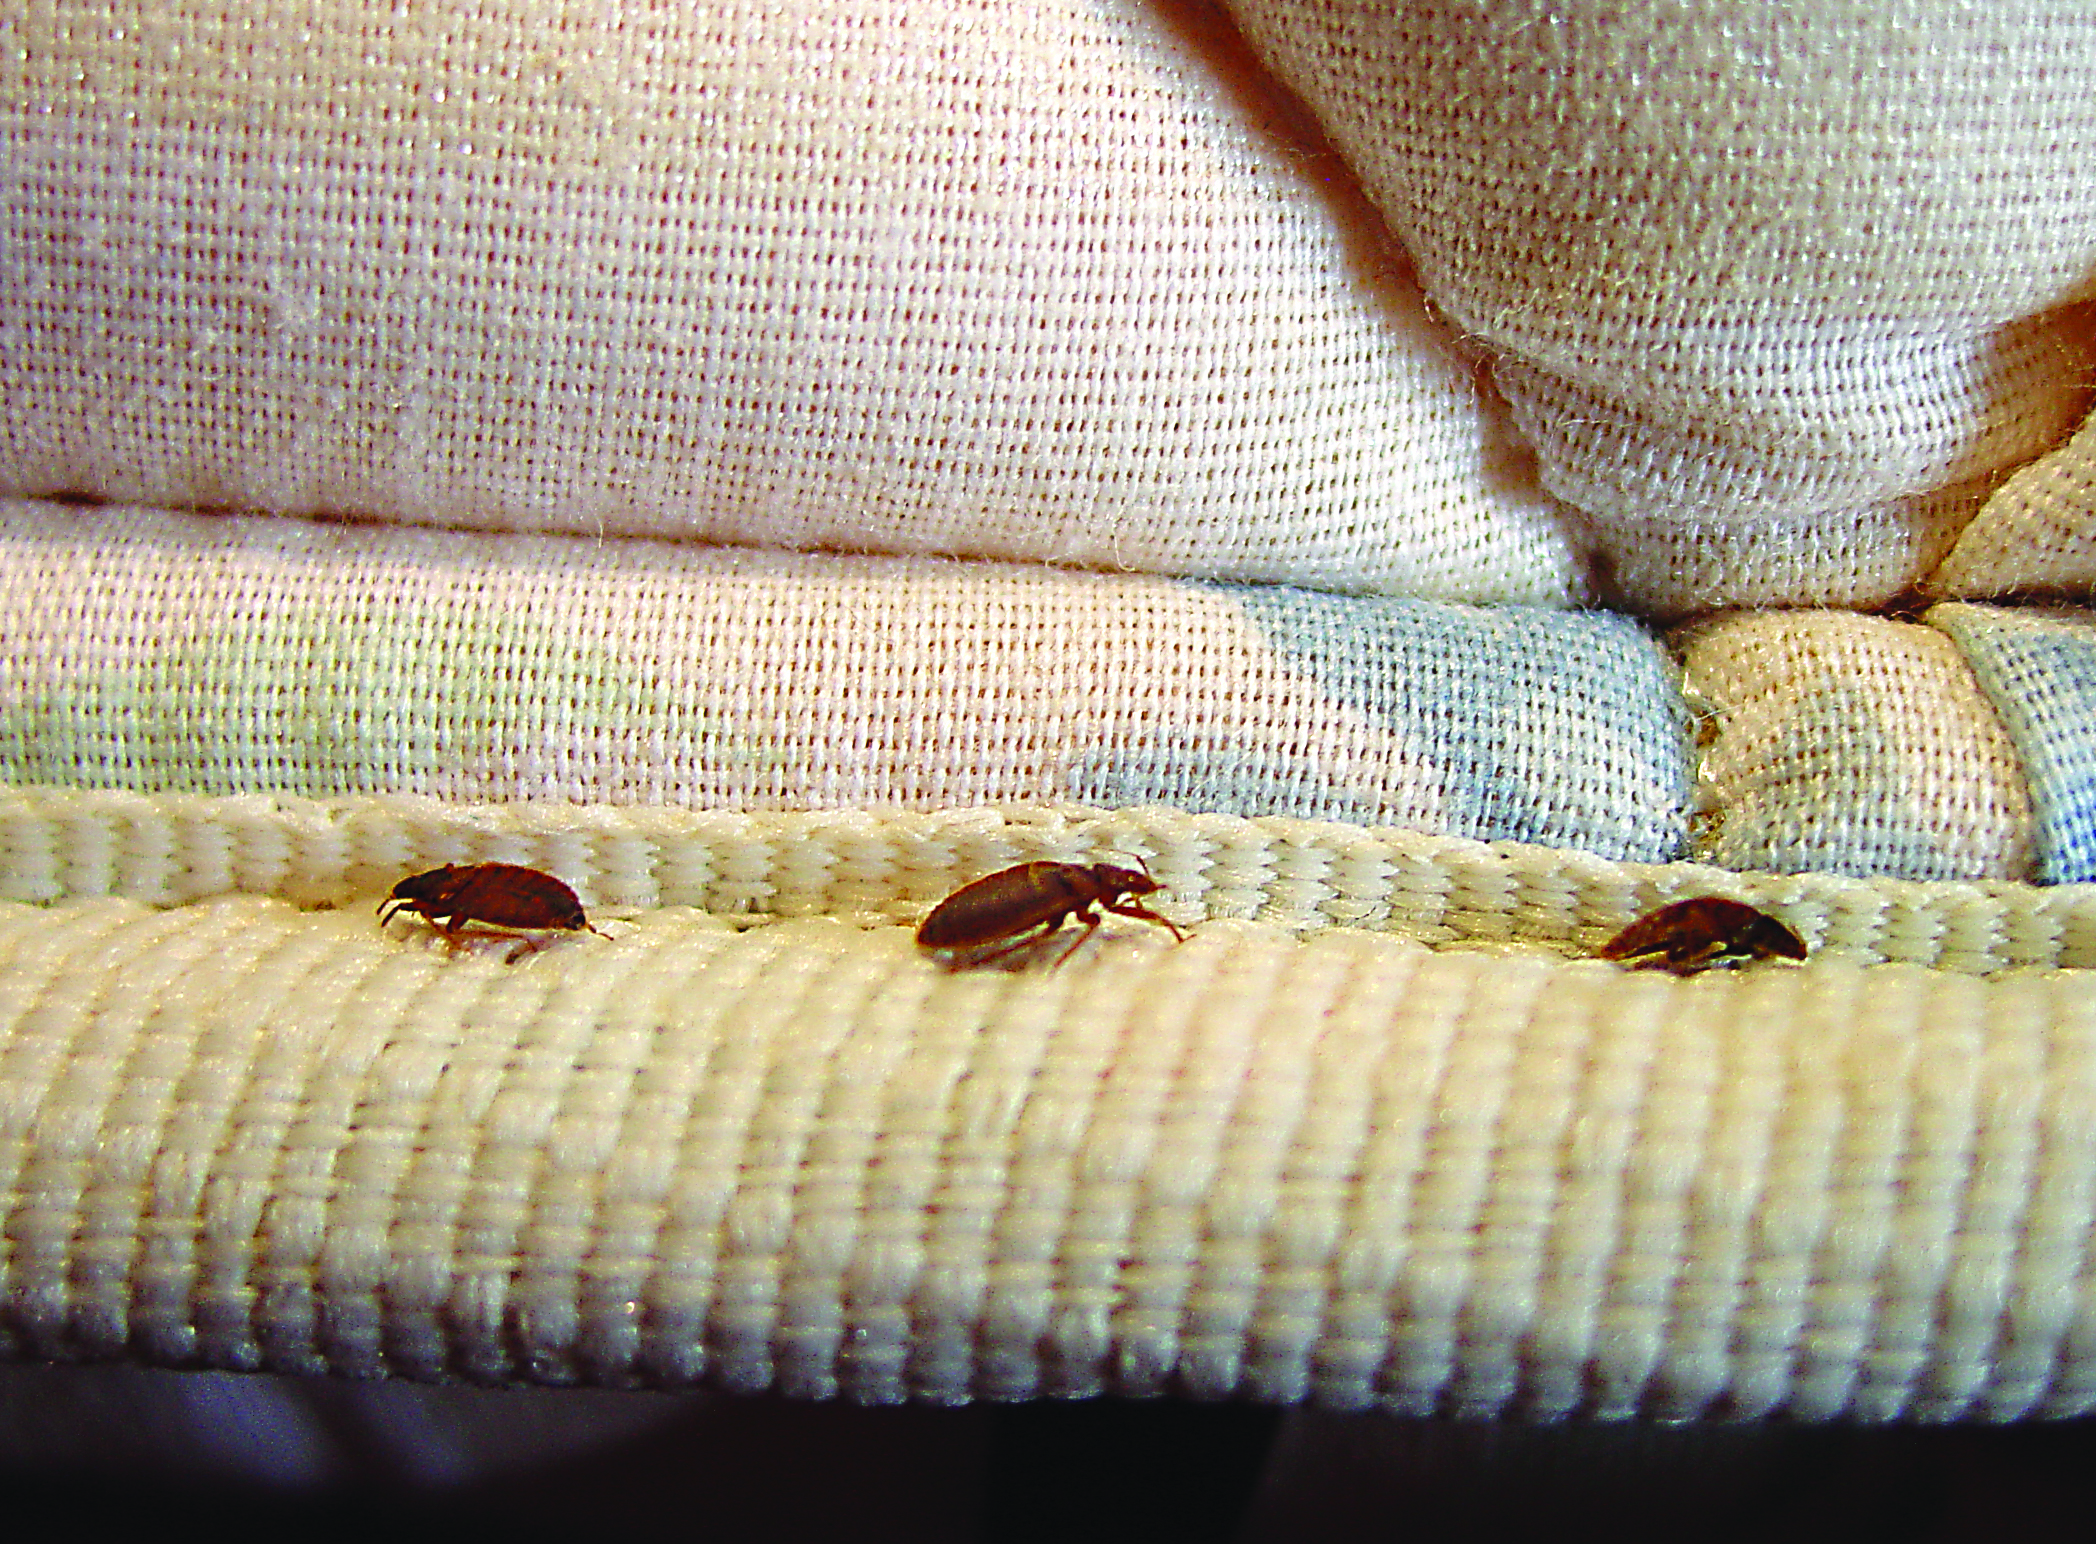 do bed bugs get in your mattress